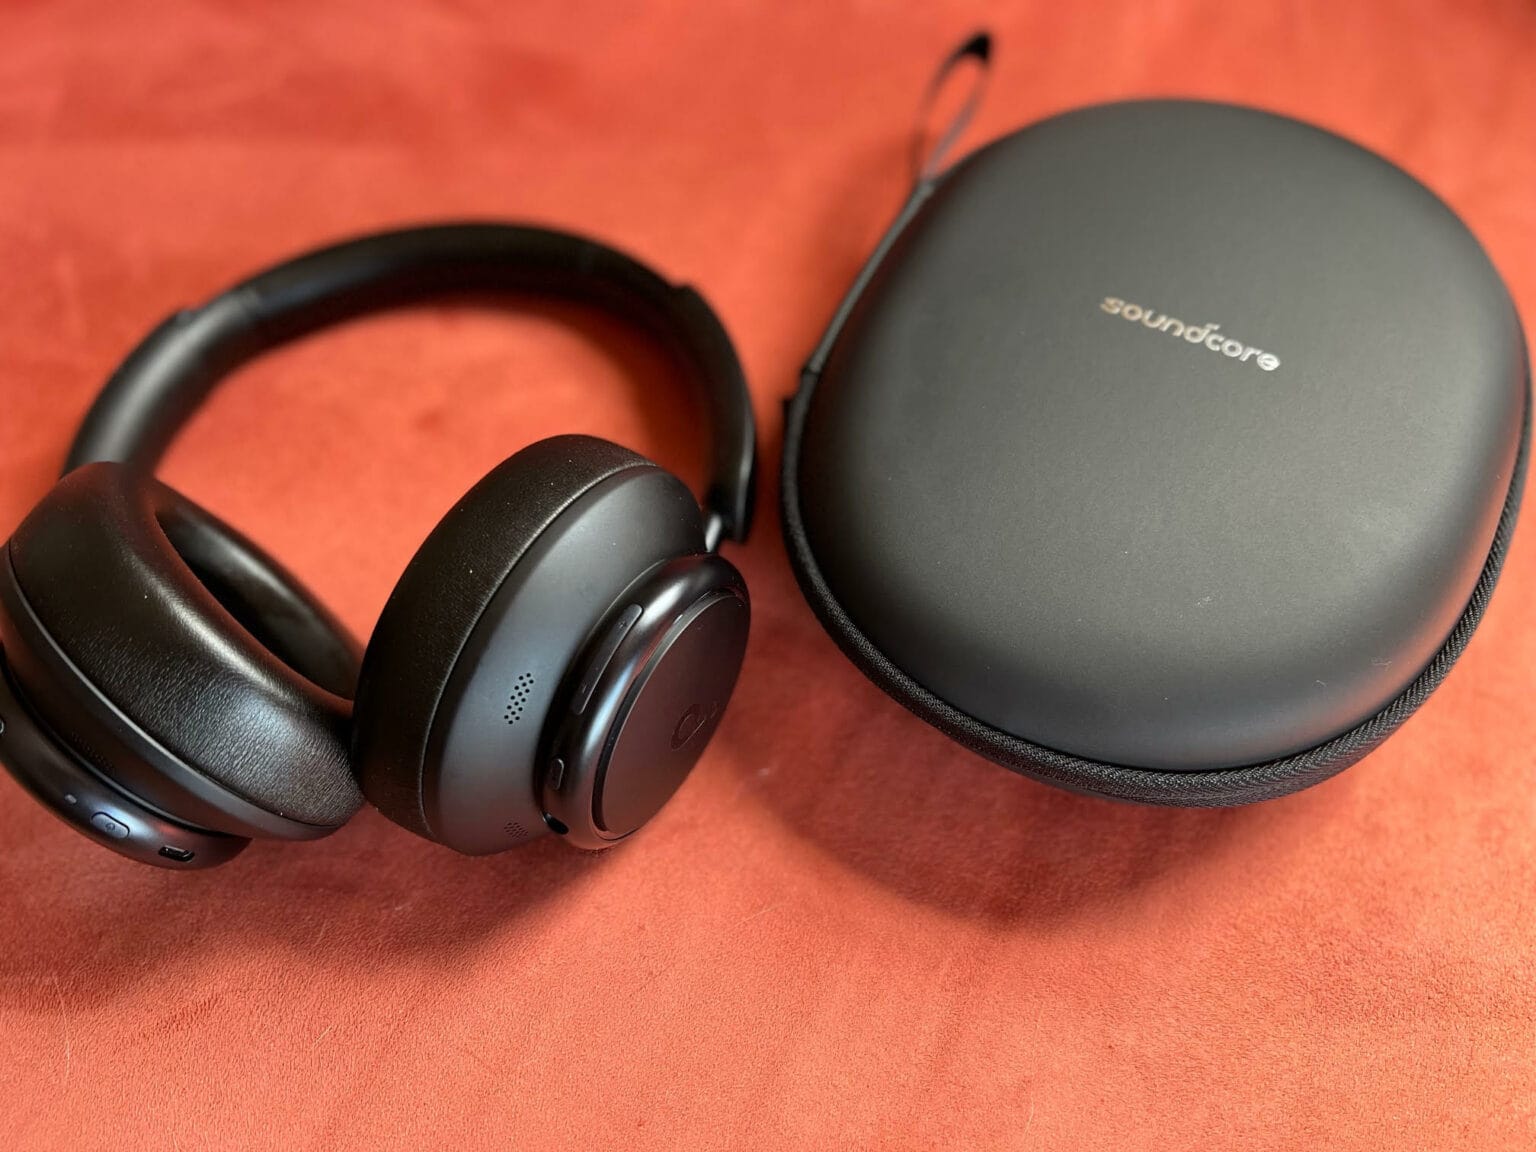 The new Soundcore Q45 headphones have strong noise cancellation and long battery life.